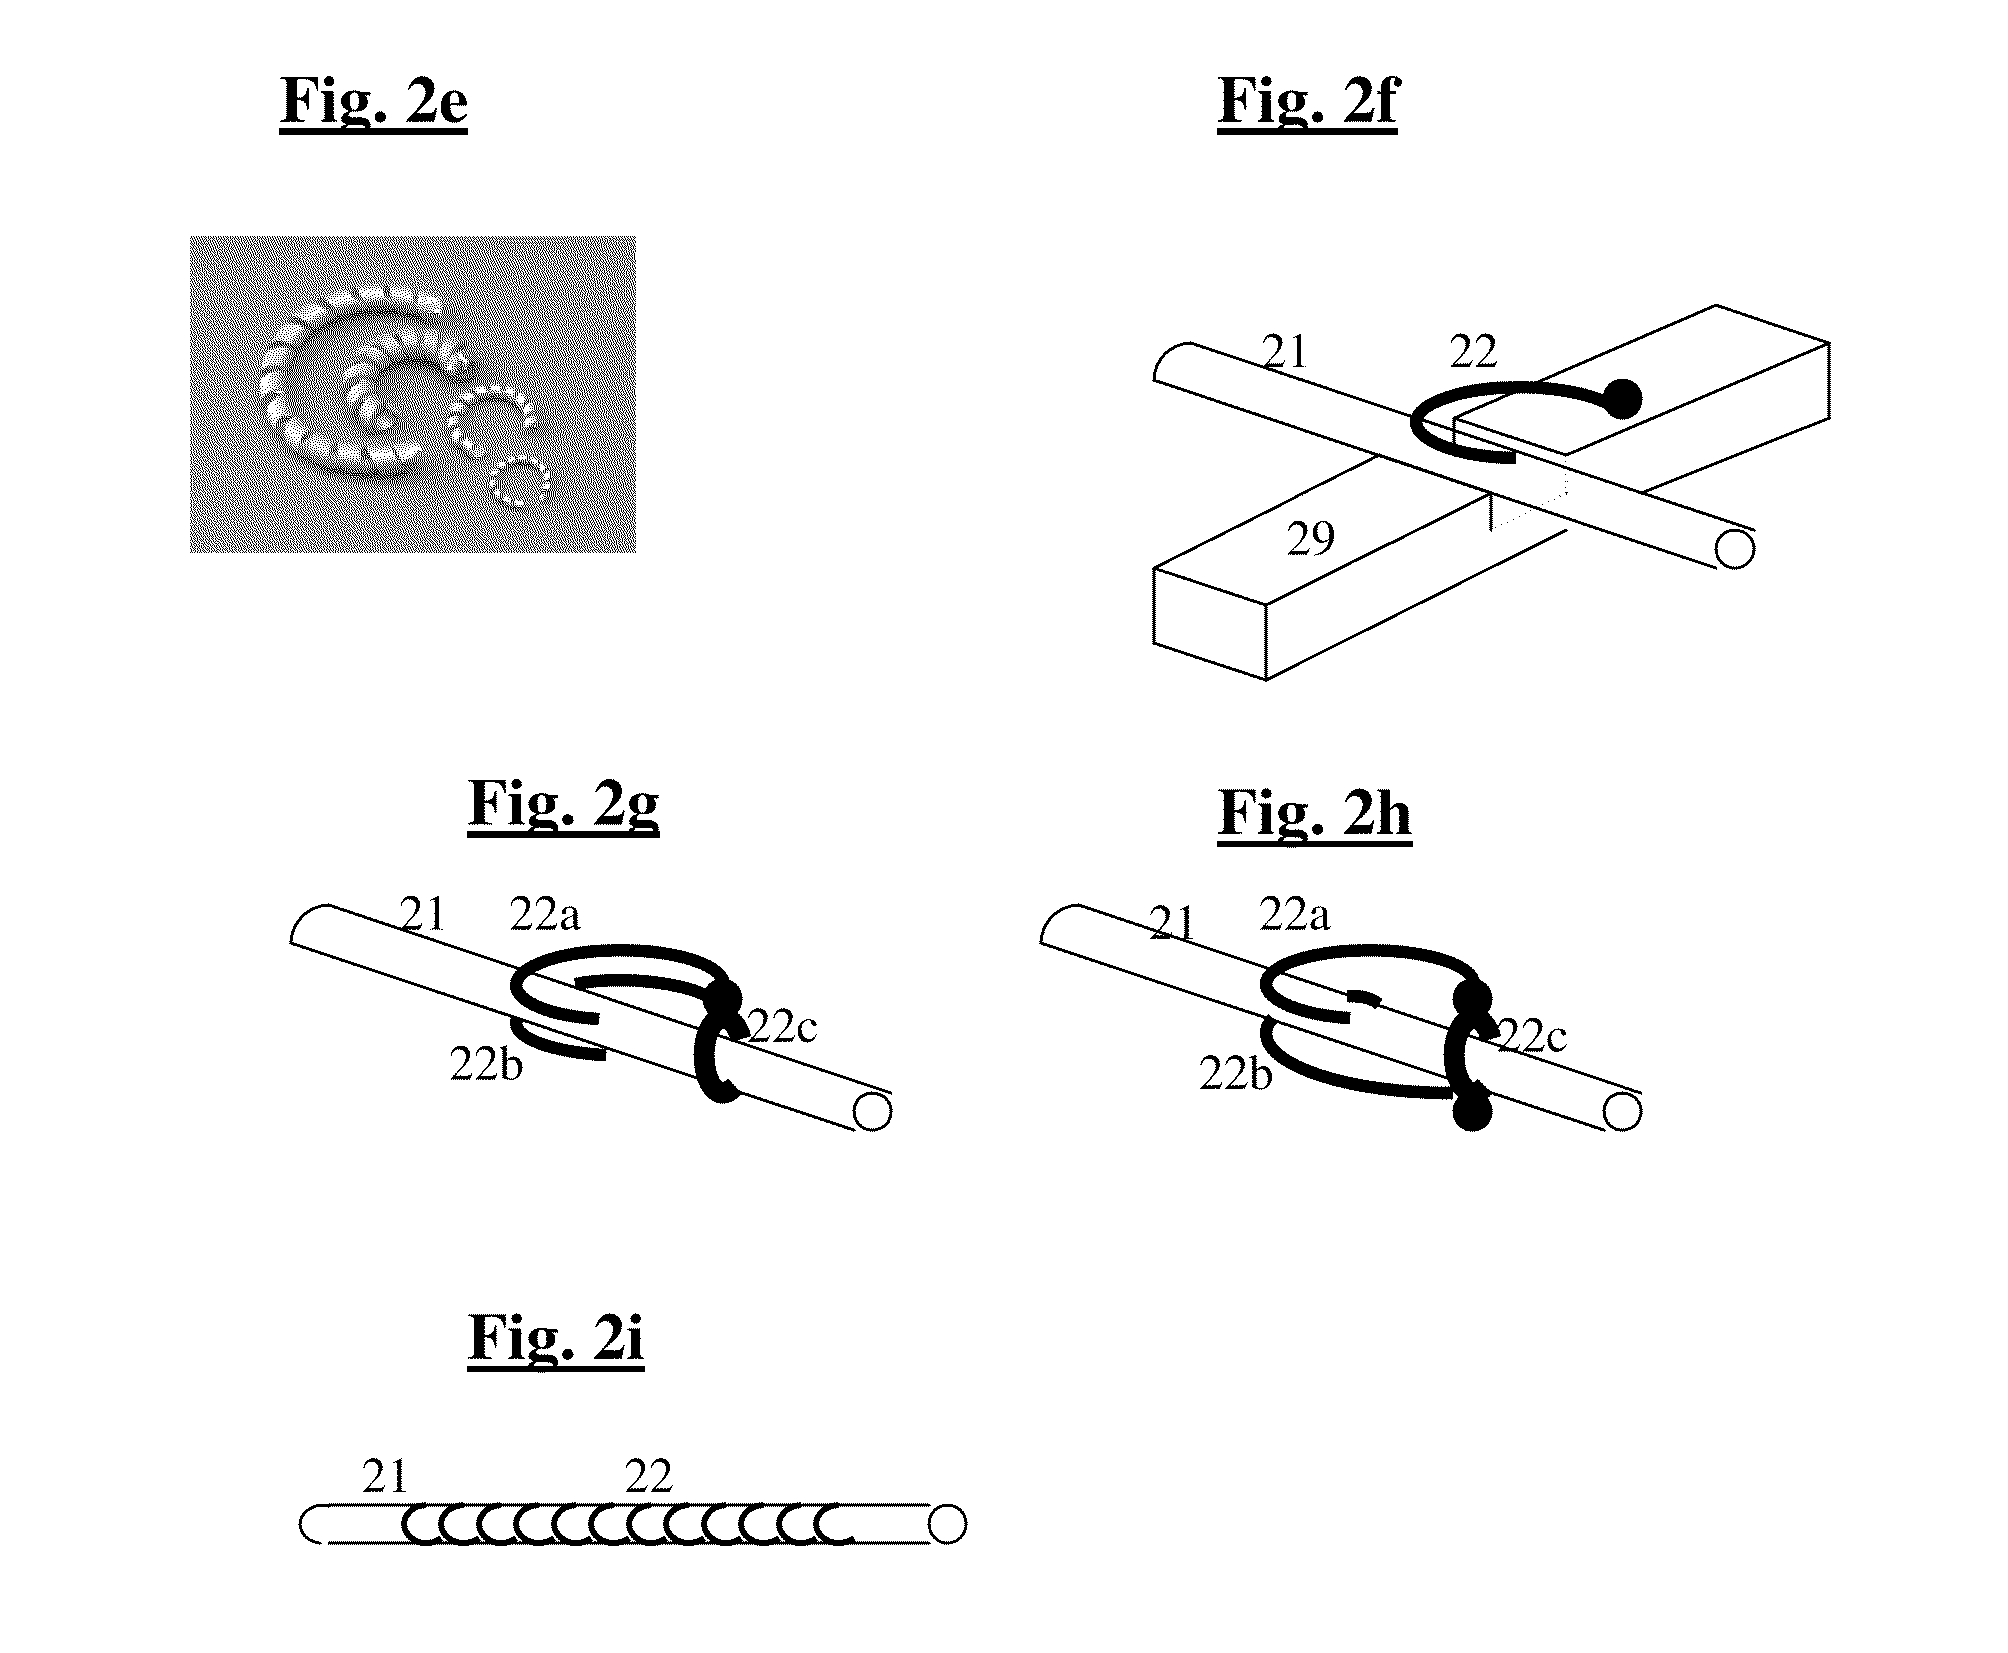 System and method for more efficient automatic irrigation based on a large number of cheap humidity sensors and automatic faucets